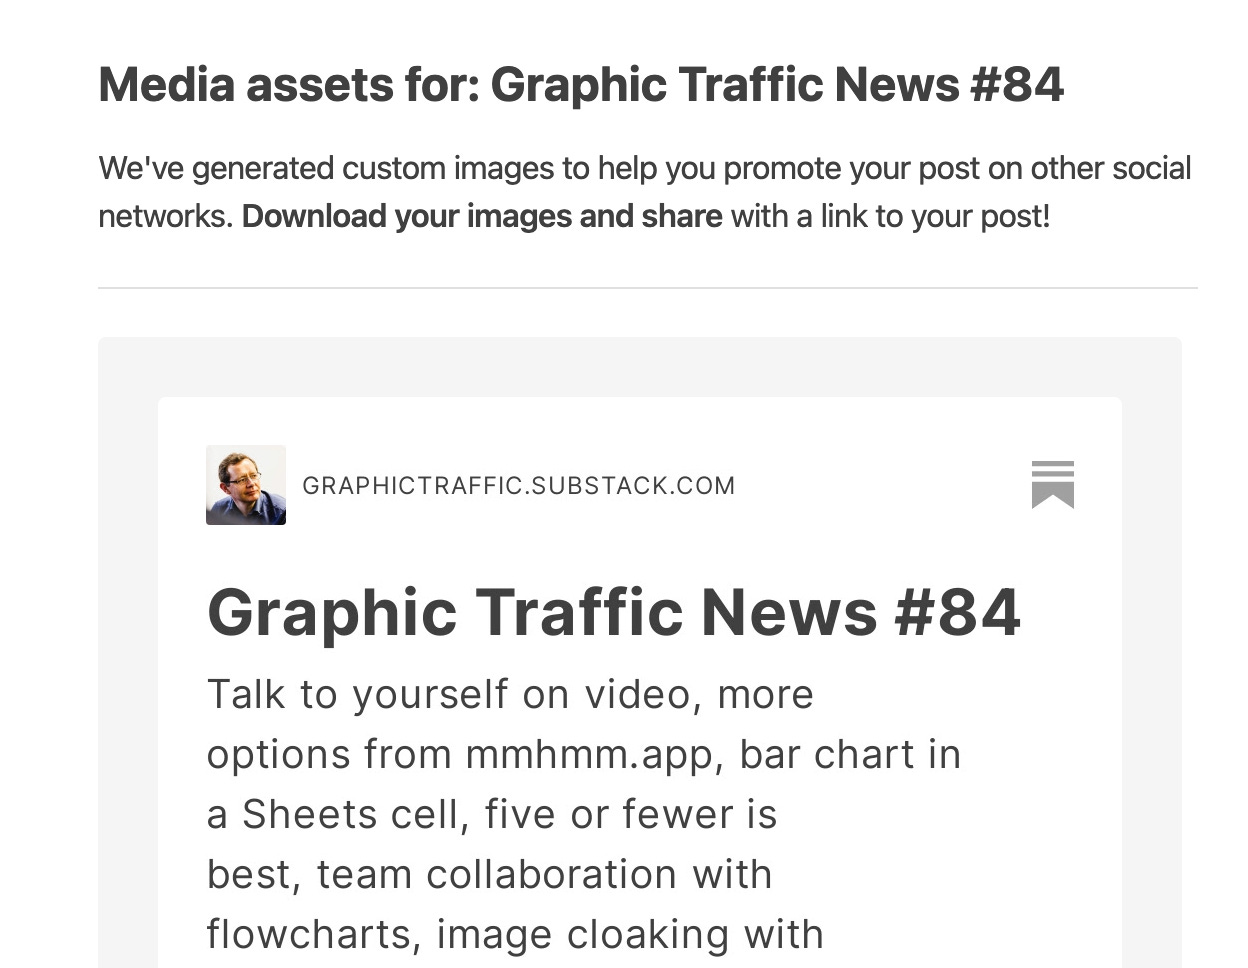 Media assets for Graphic Traffic News